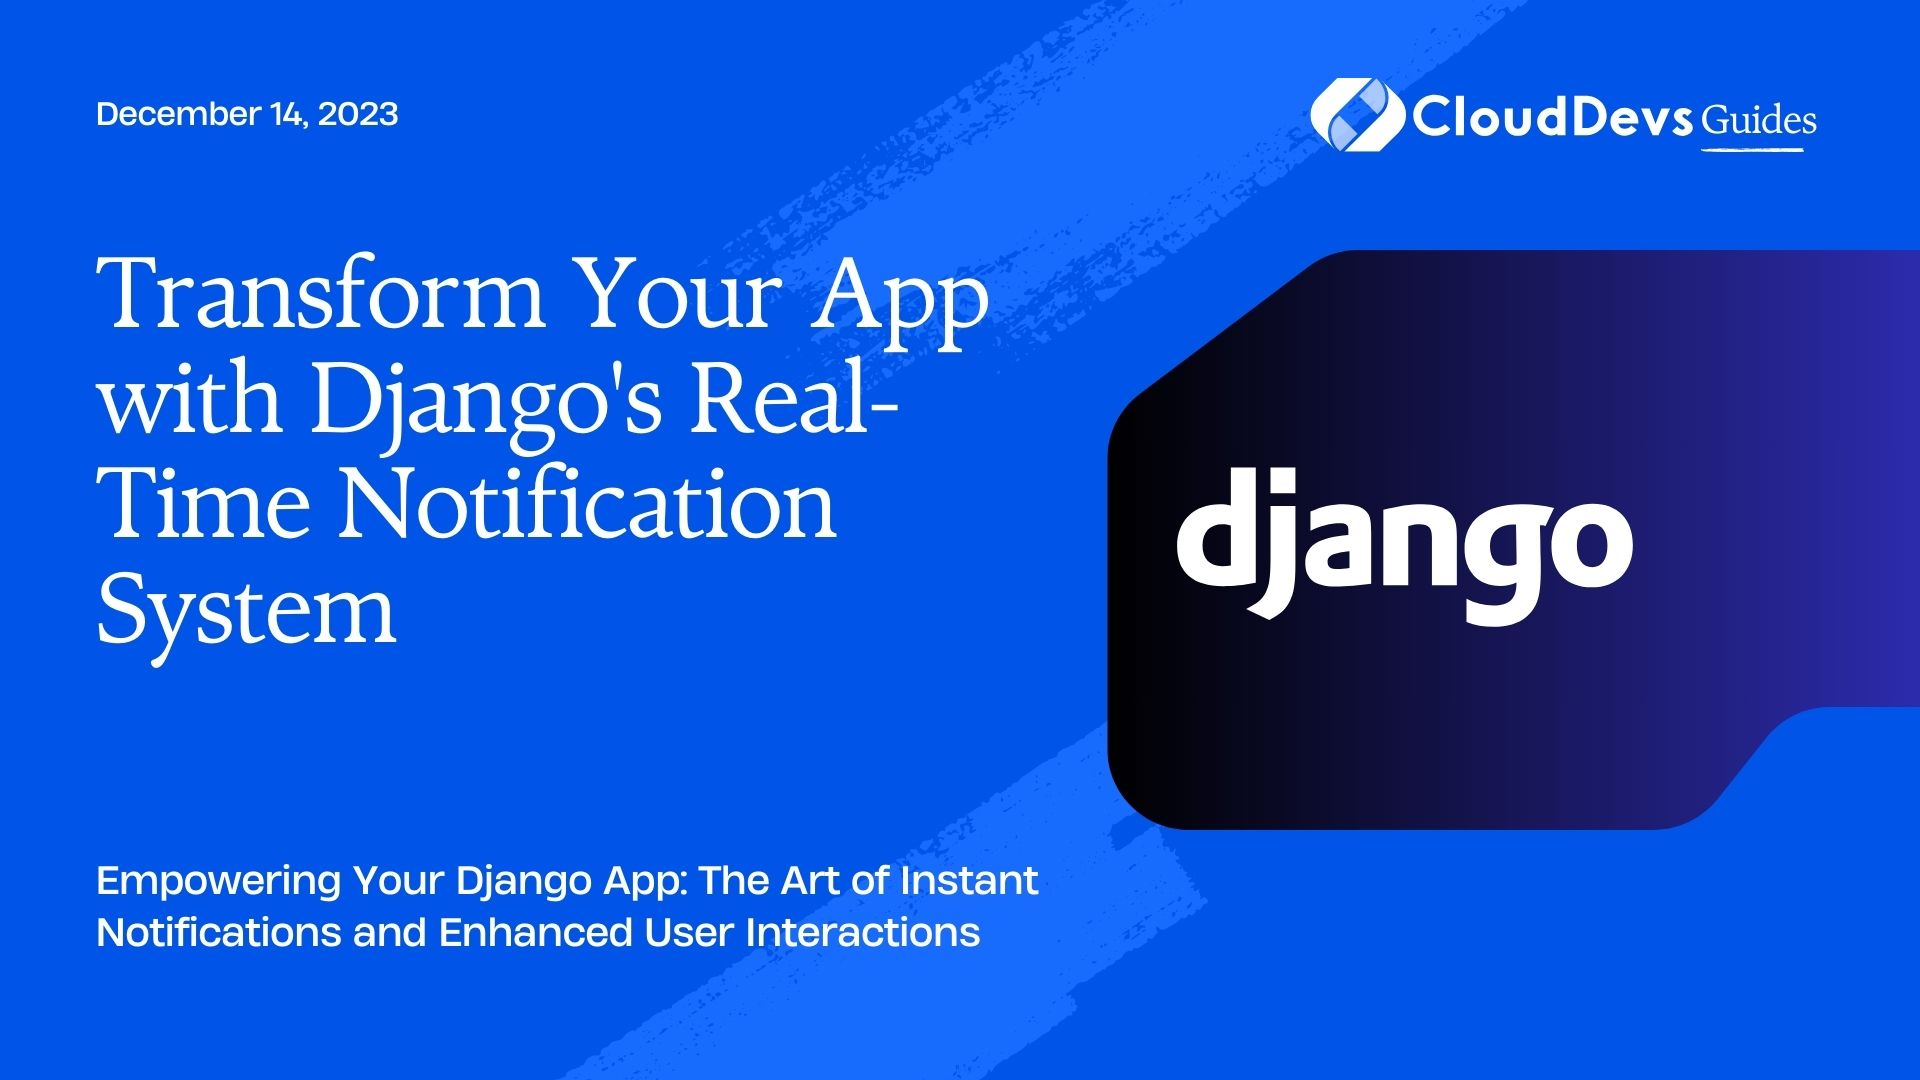 Transform Your App with Django's Real-Time Notification System